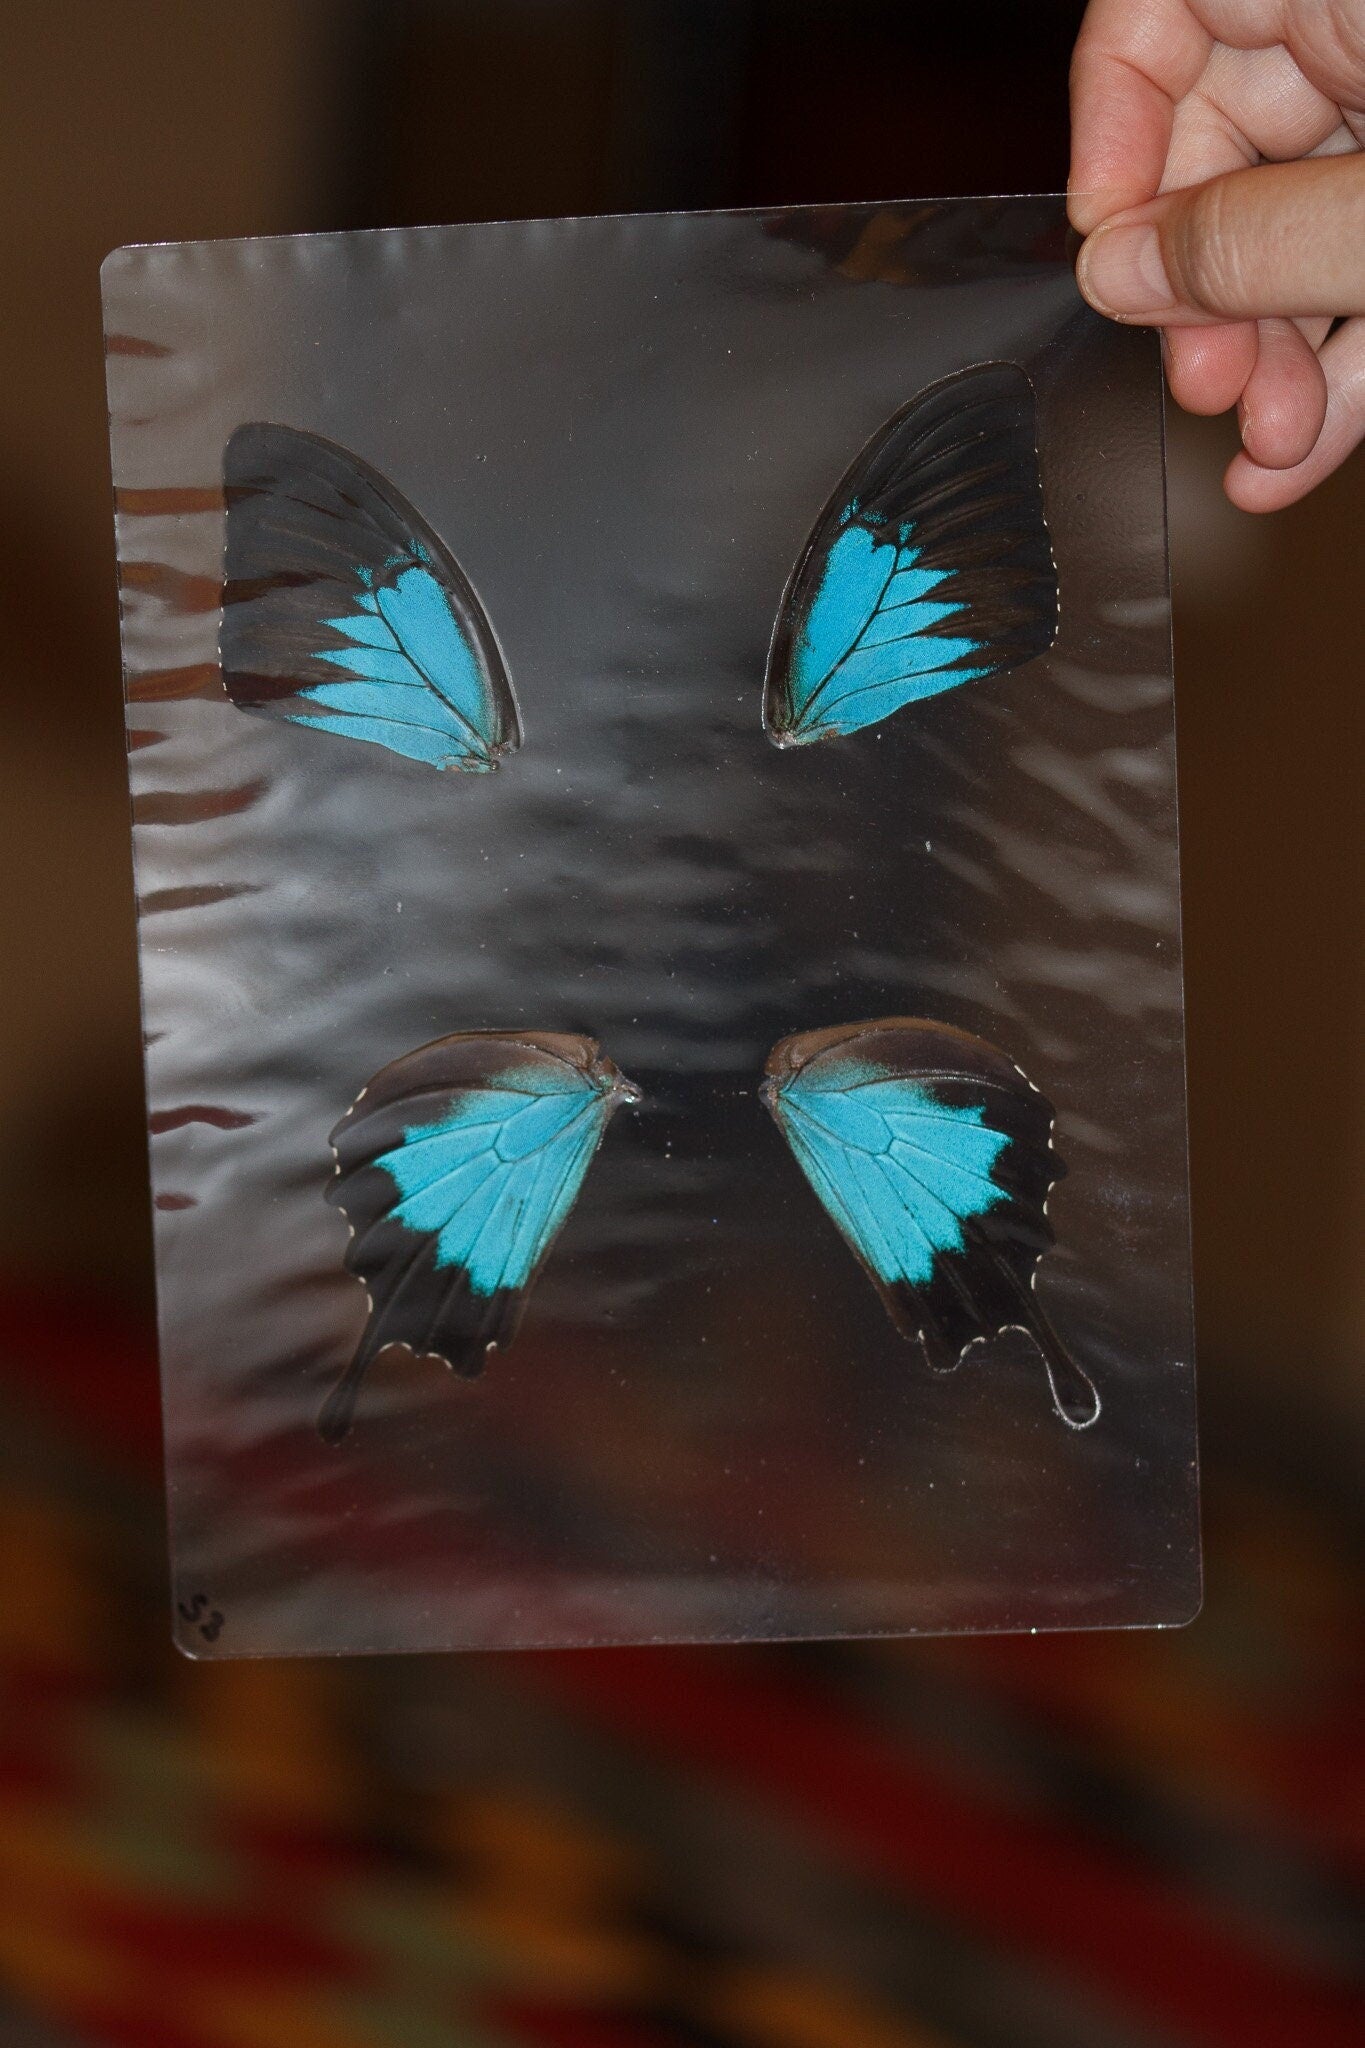 Butterfly Wings GLOSSY LAMINATED SHEET Real Ethically Sourced Specimens Moths Butterflies Wings for Art -- Papilio ulysses